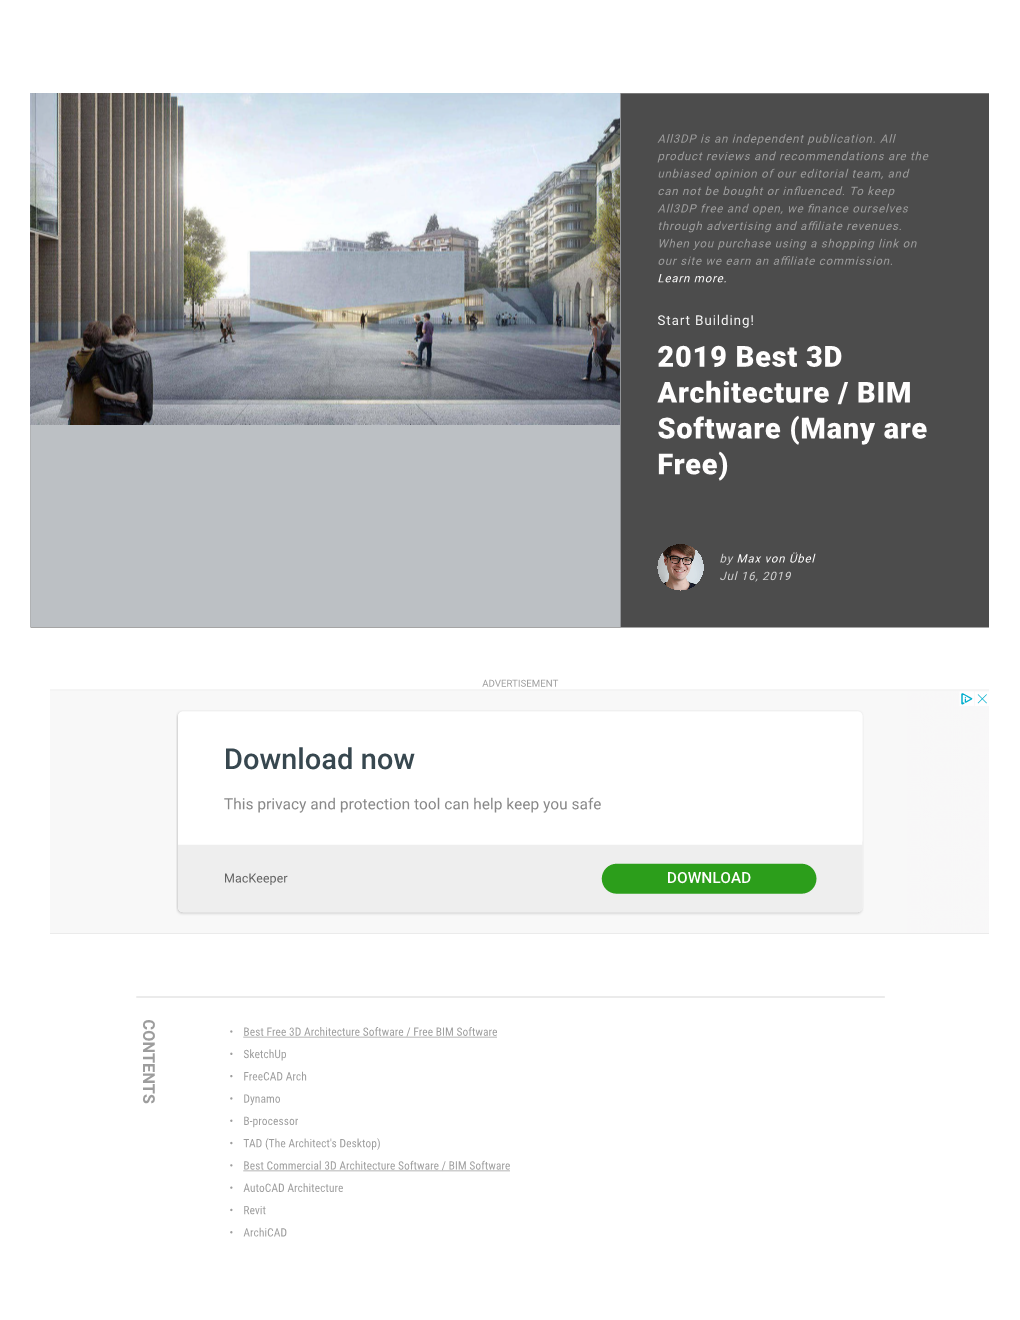 2019 Best 3D Architecture / BIM Software (Many Are Free)